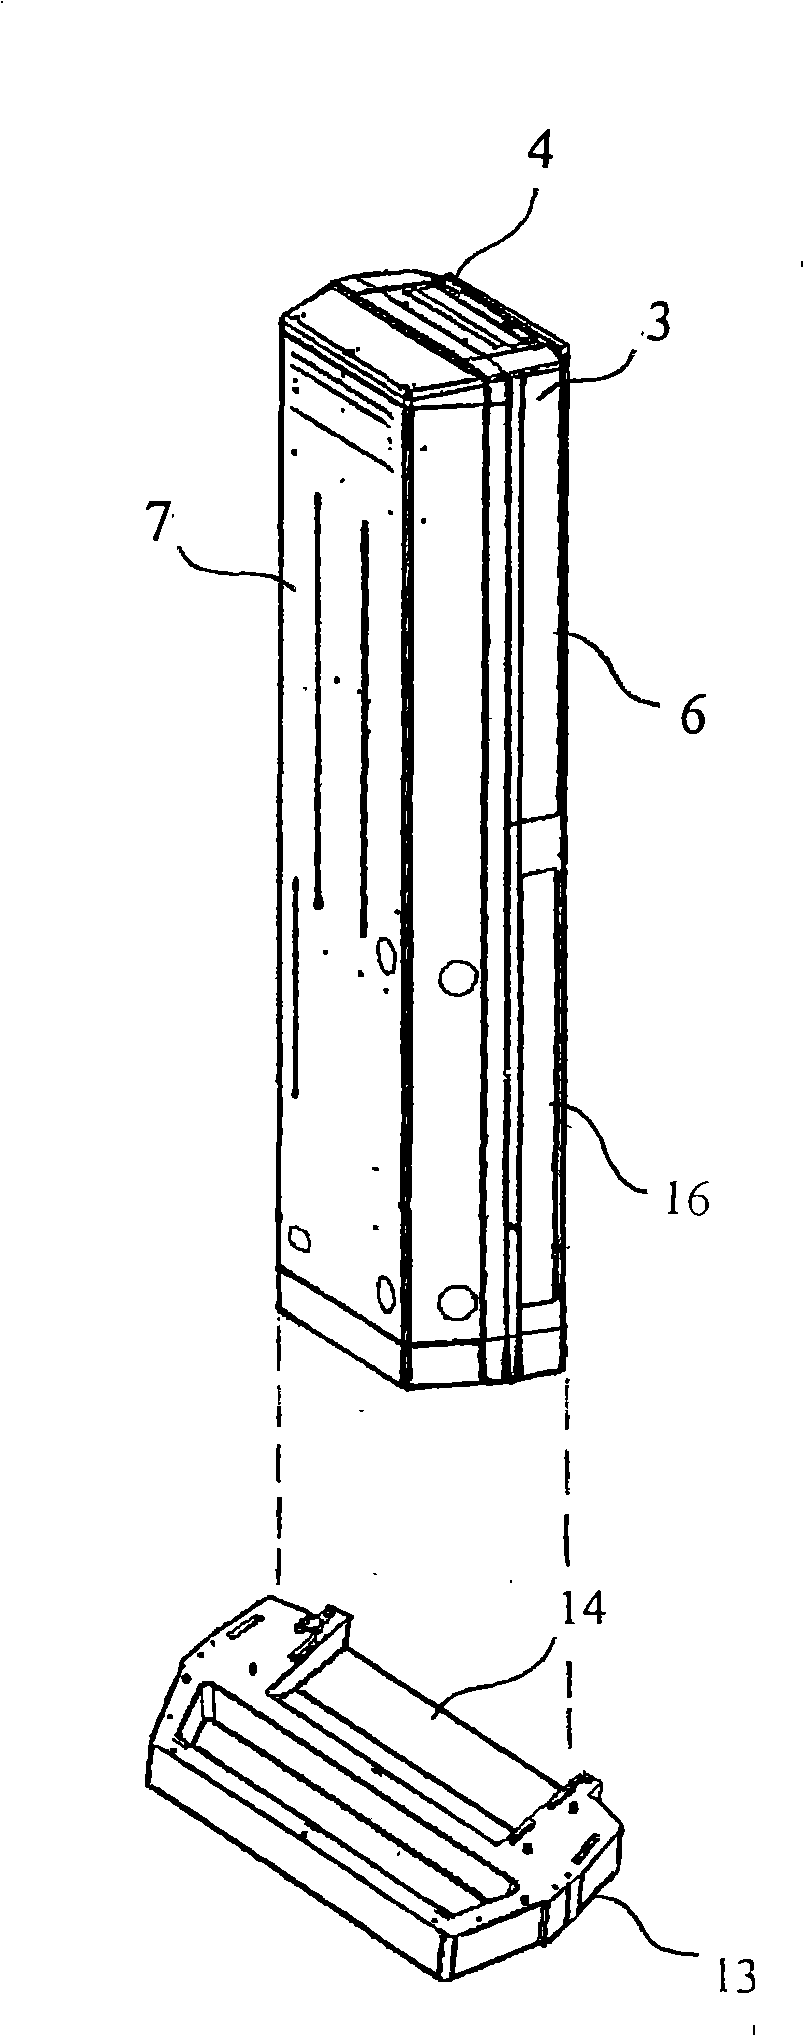 Structure for preventing indoor machine for cabinet air conditioner from swinging